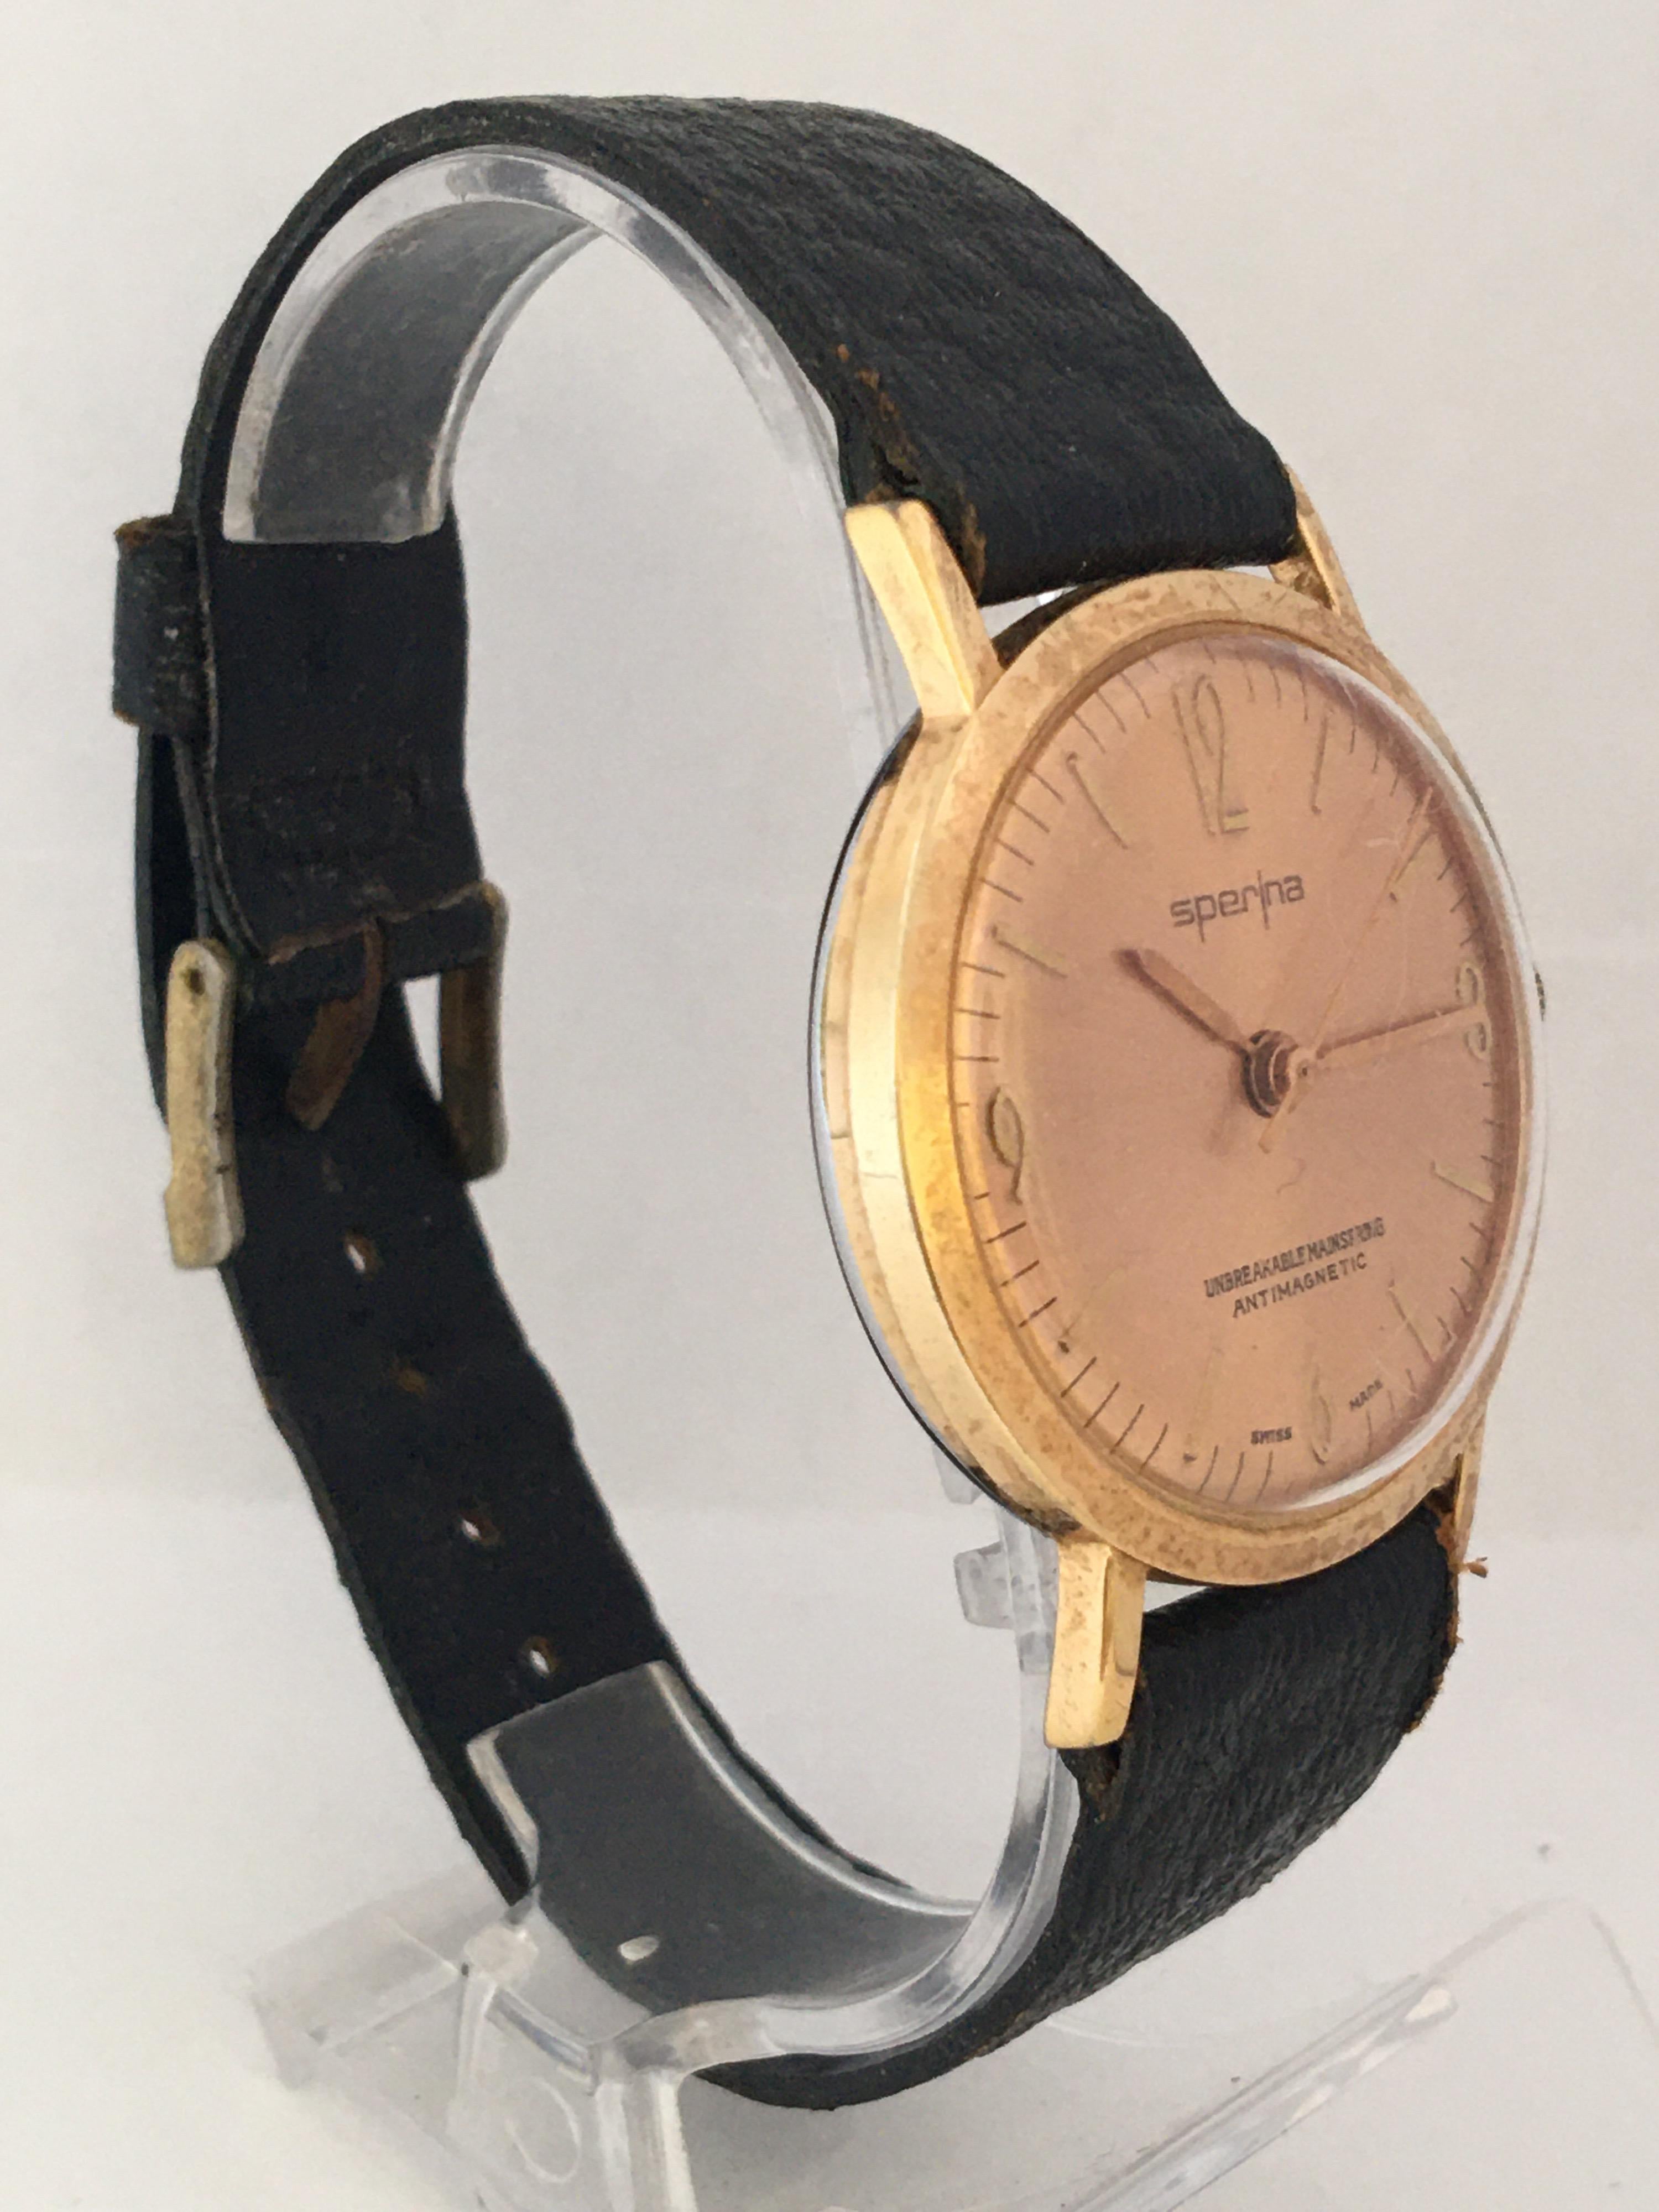 This beautiful pre-owned vintage rose gold plated hand-winding watch is in good working condition and it is ticking and running well. Some small scratches on the glass as shown. 

Study the images carefully as form part of the description.